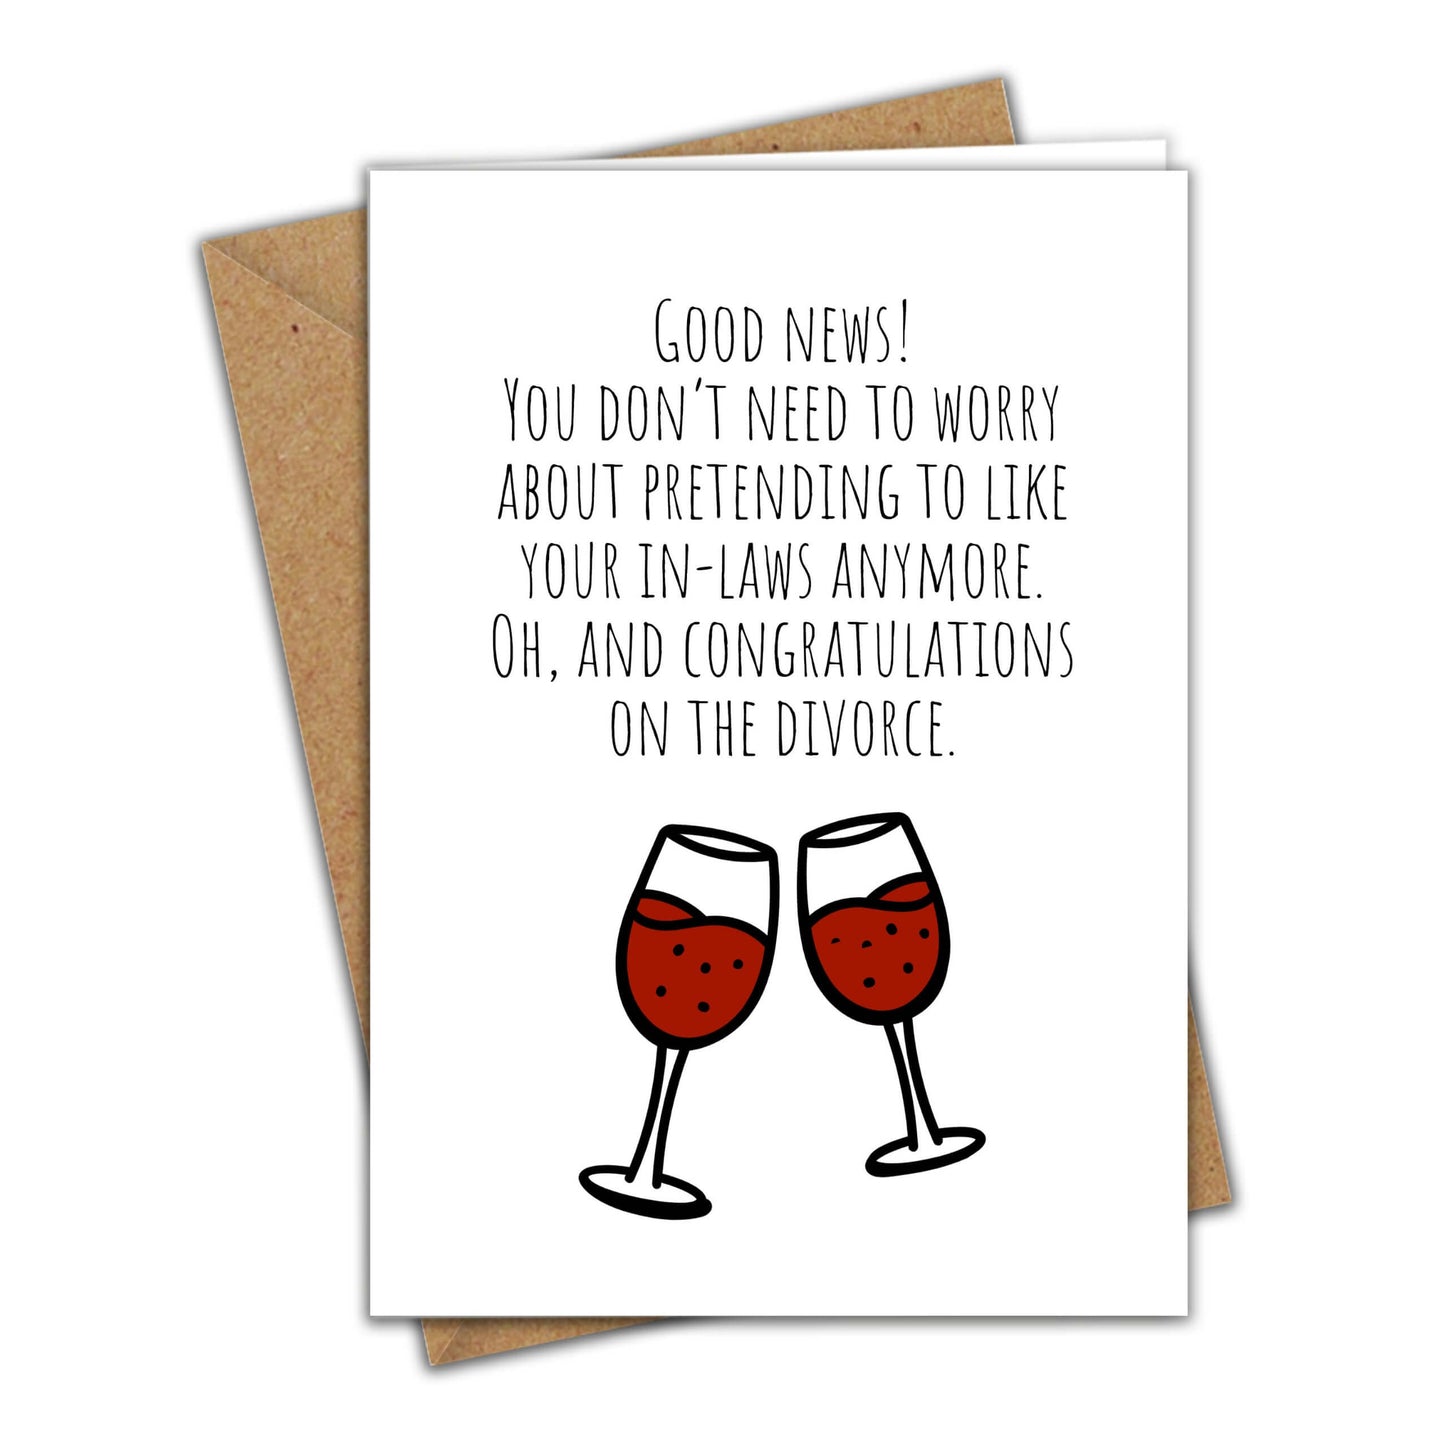 Little Kraken's Good News, Don't Have to Pretend to Like In Laws Anymore | Funny Divorce Card | Congratulations on Your Divorce Greeting Card, Divorce Cards for £3.50 each